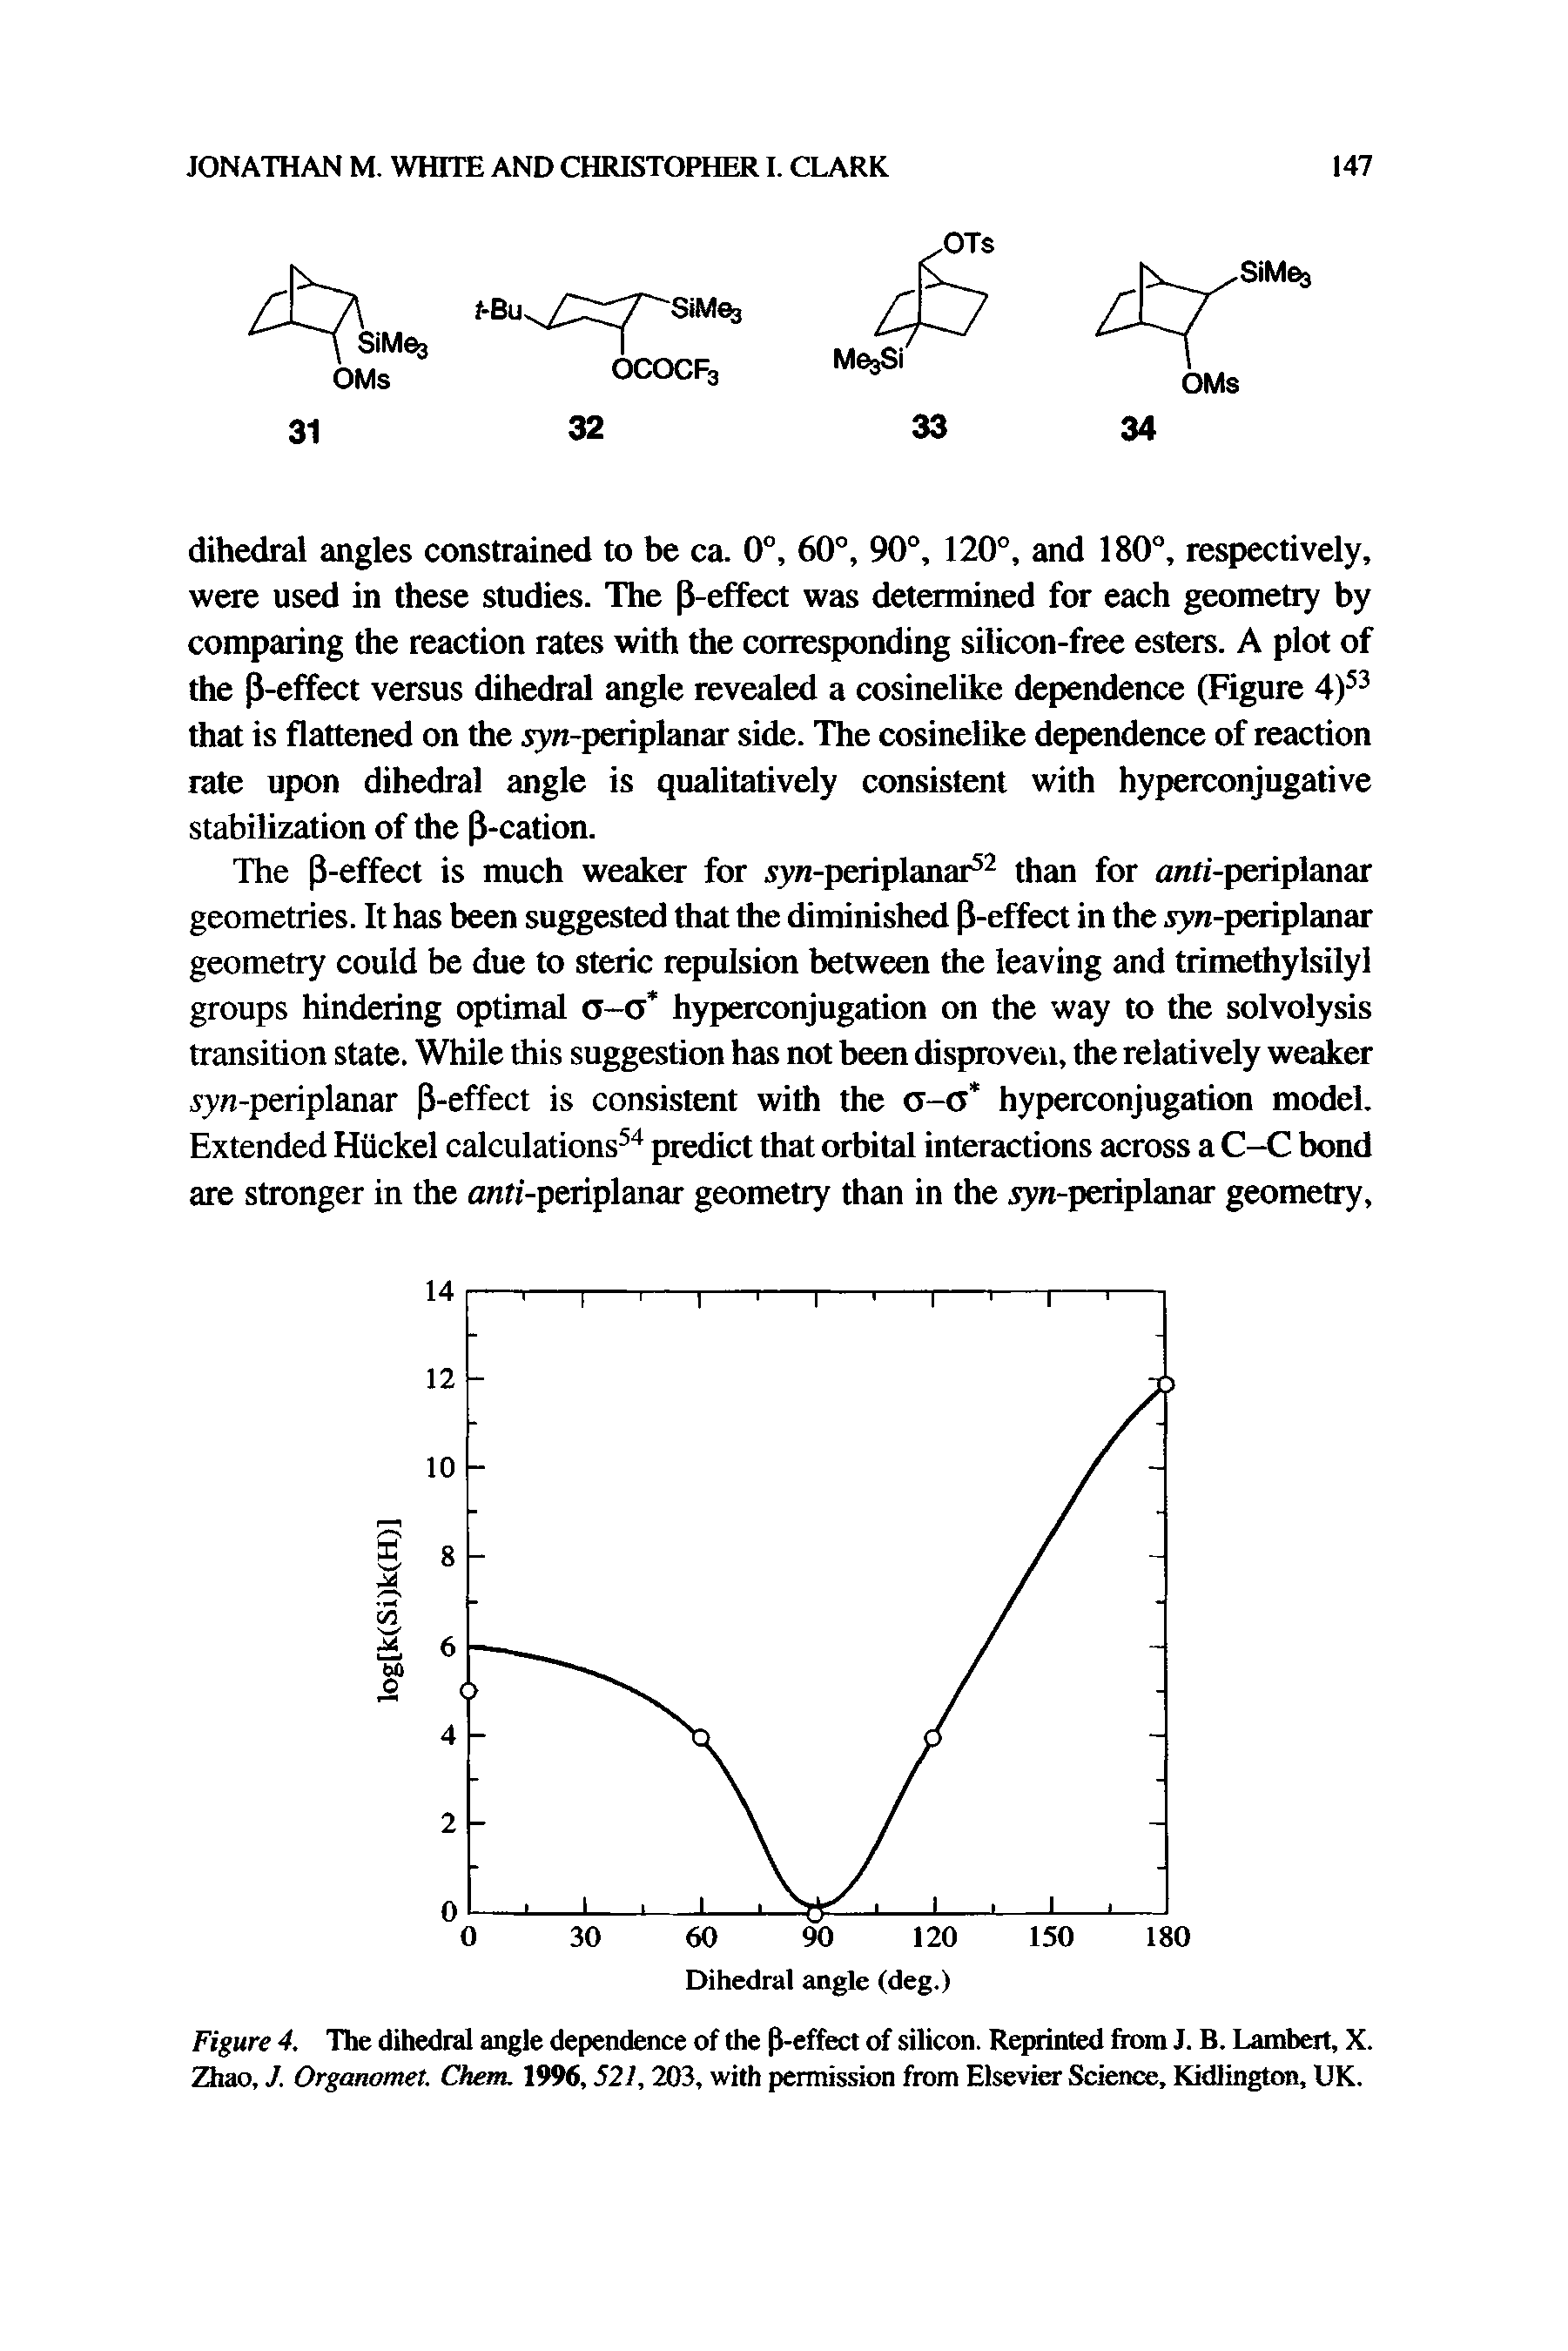 Figure 4. The dihedral angle dependence of the p-effect of silicon. Reprinted from J. B. Lambert, X. Zhao, J. Organomet. Chem. 1996,521,203, with permission from Elsevier Science, Kidlington, UK.